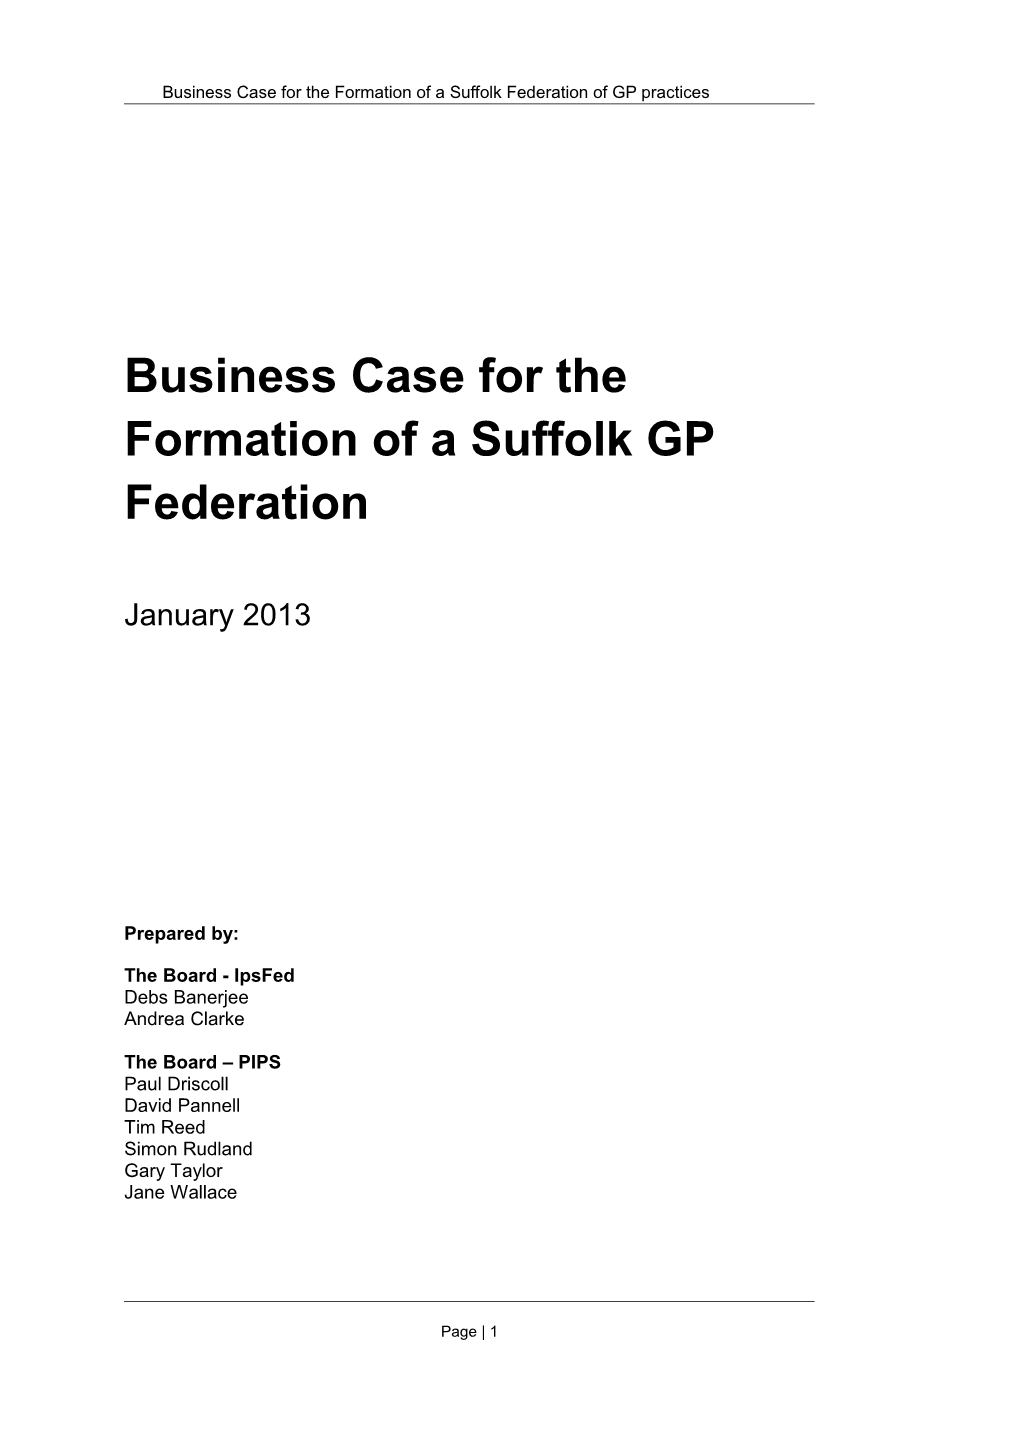 Business Case for the Formation of a Suffolk GP Federation